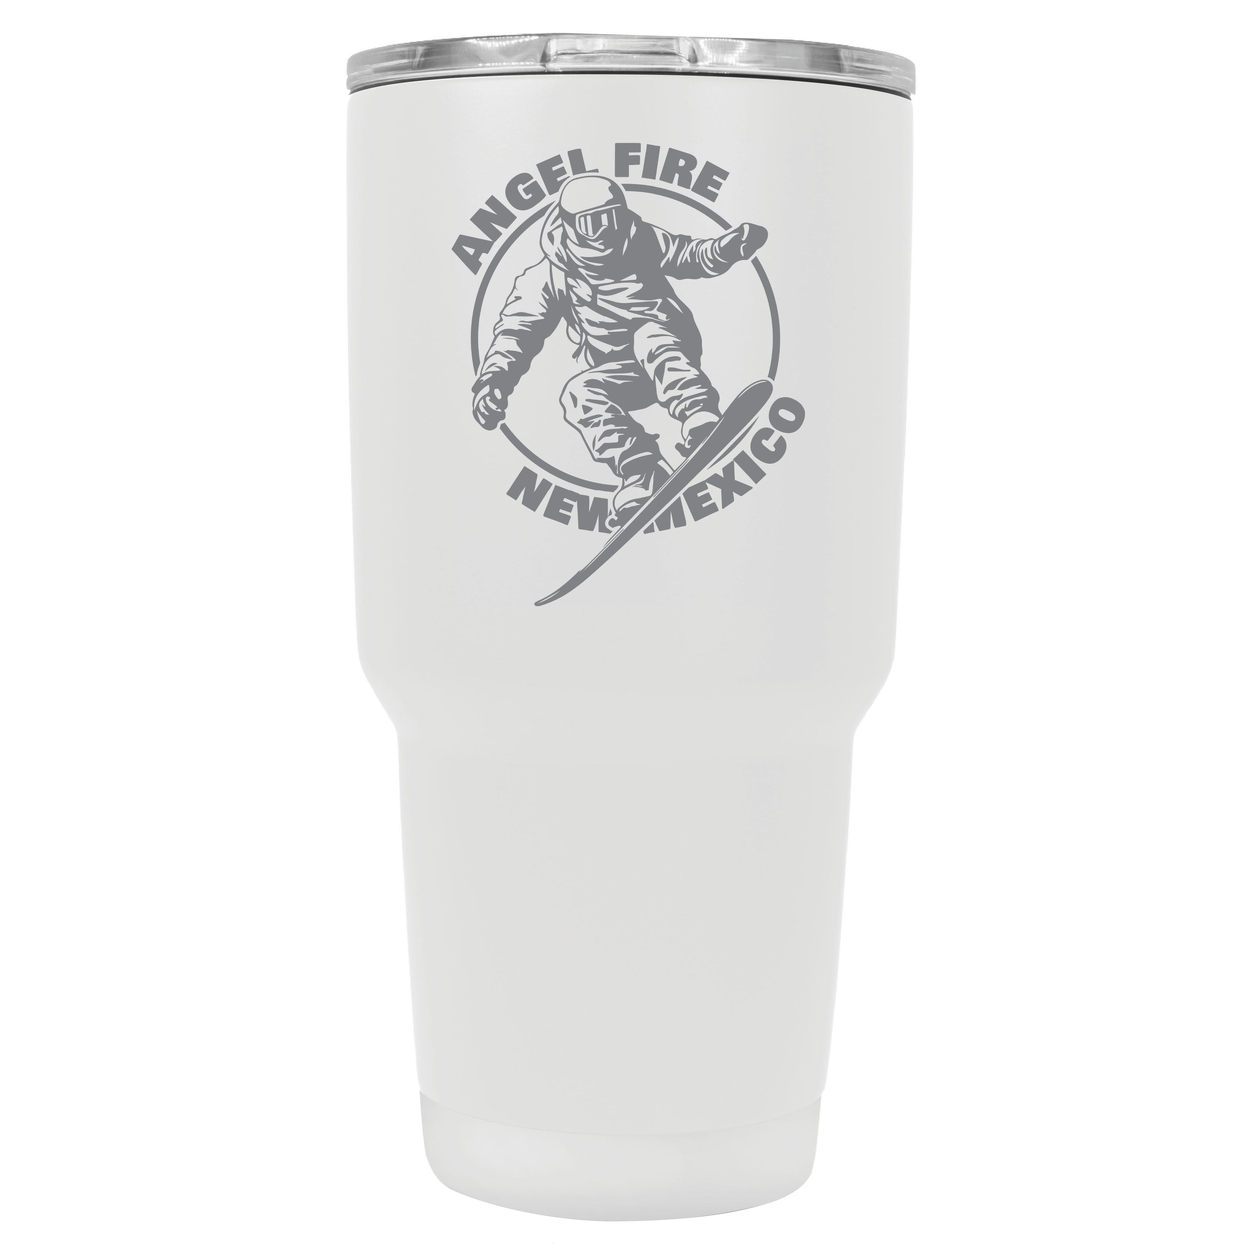 Angel Fire New Mexico Souvenir 24 Oz Engraved Insulated Stainless Steel Tumbler - Black,,2-Pack